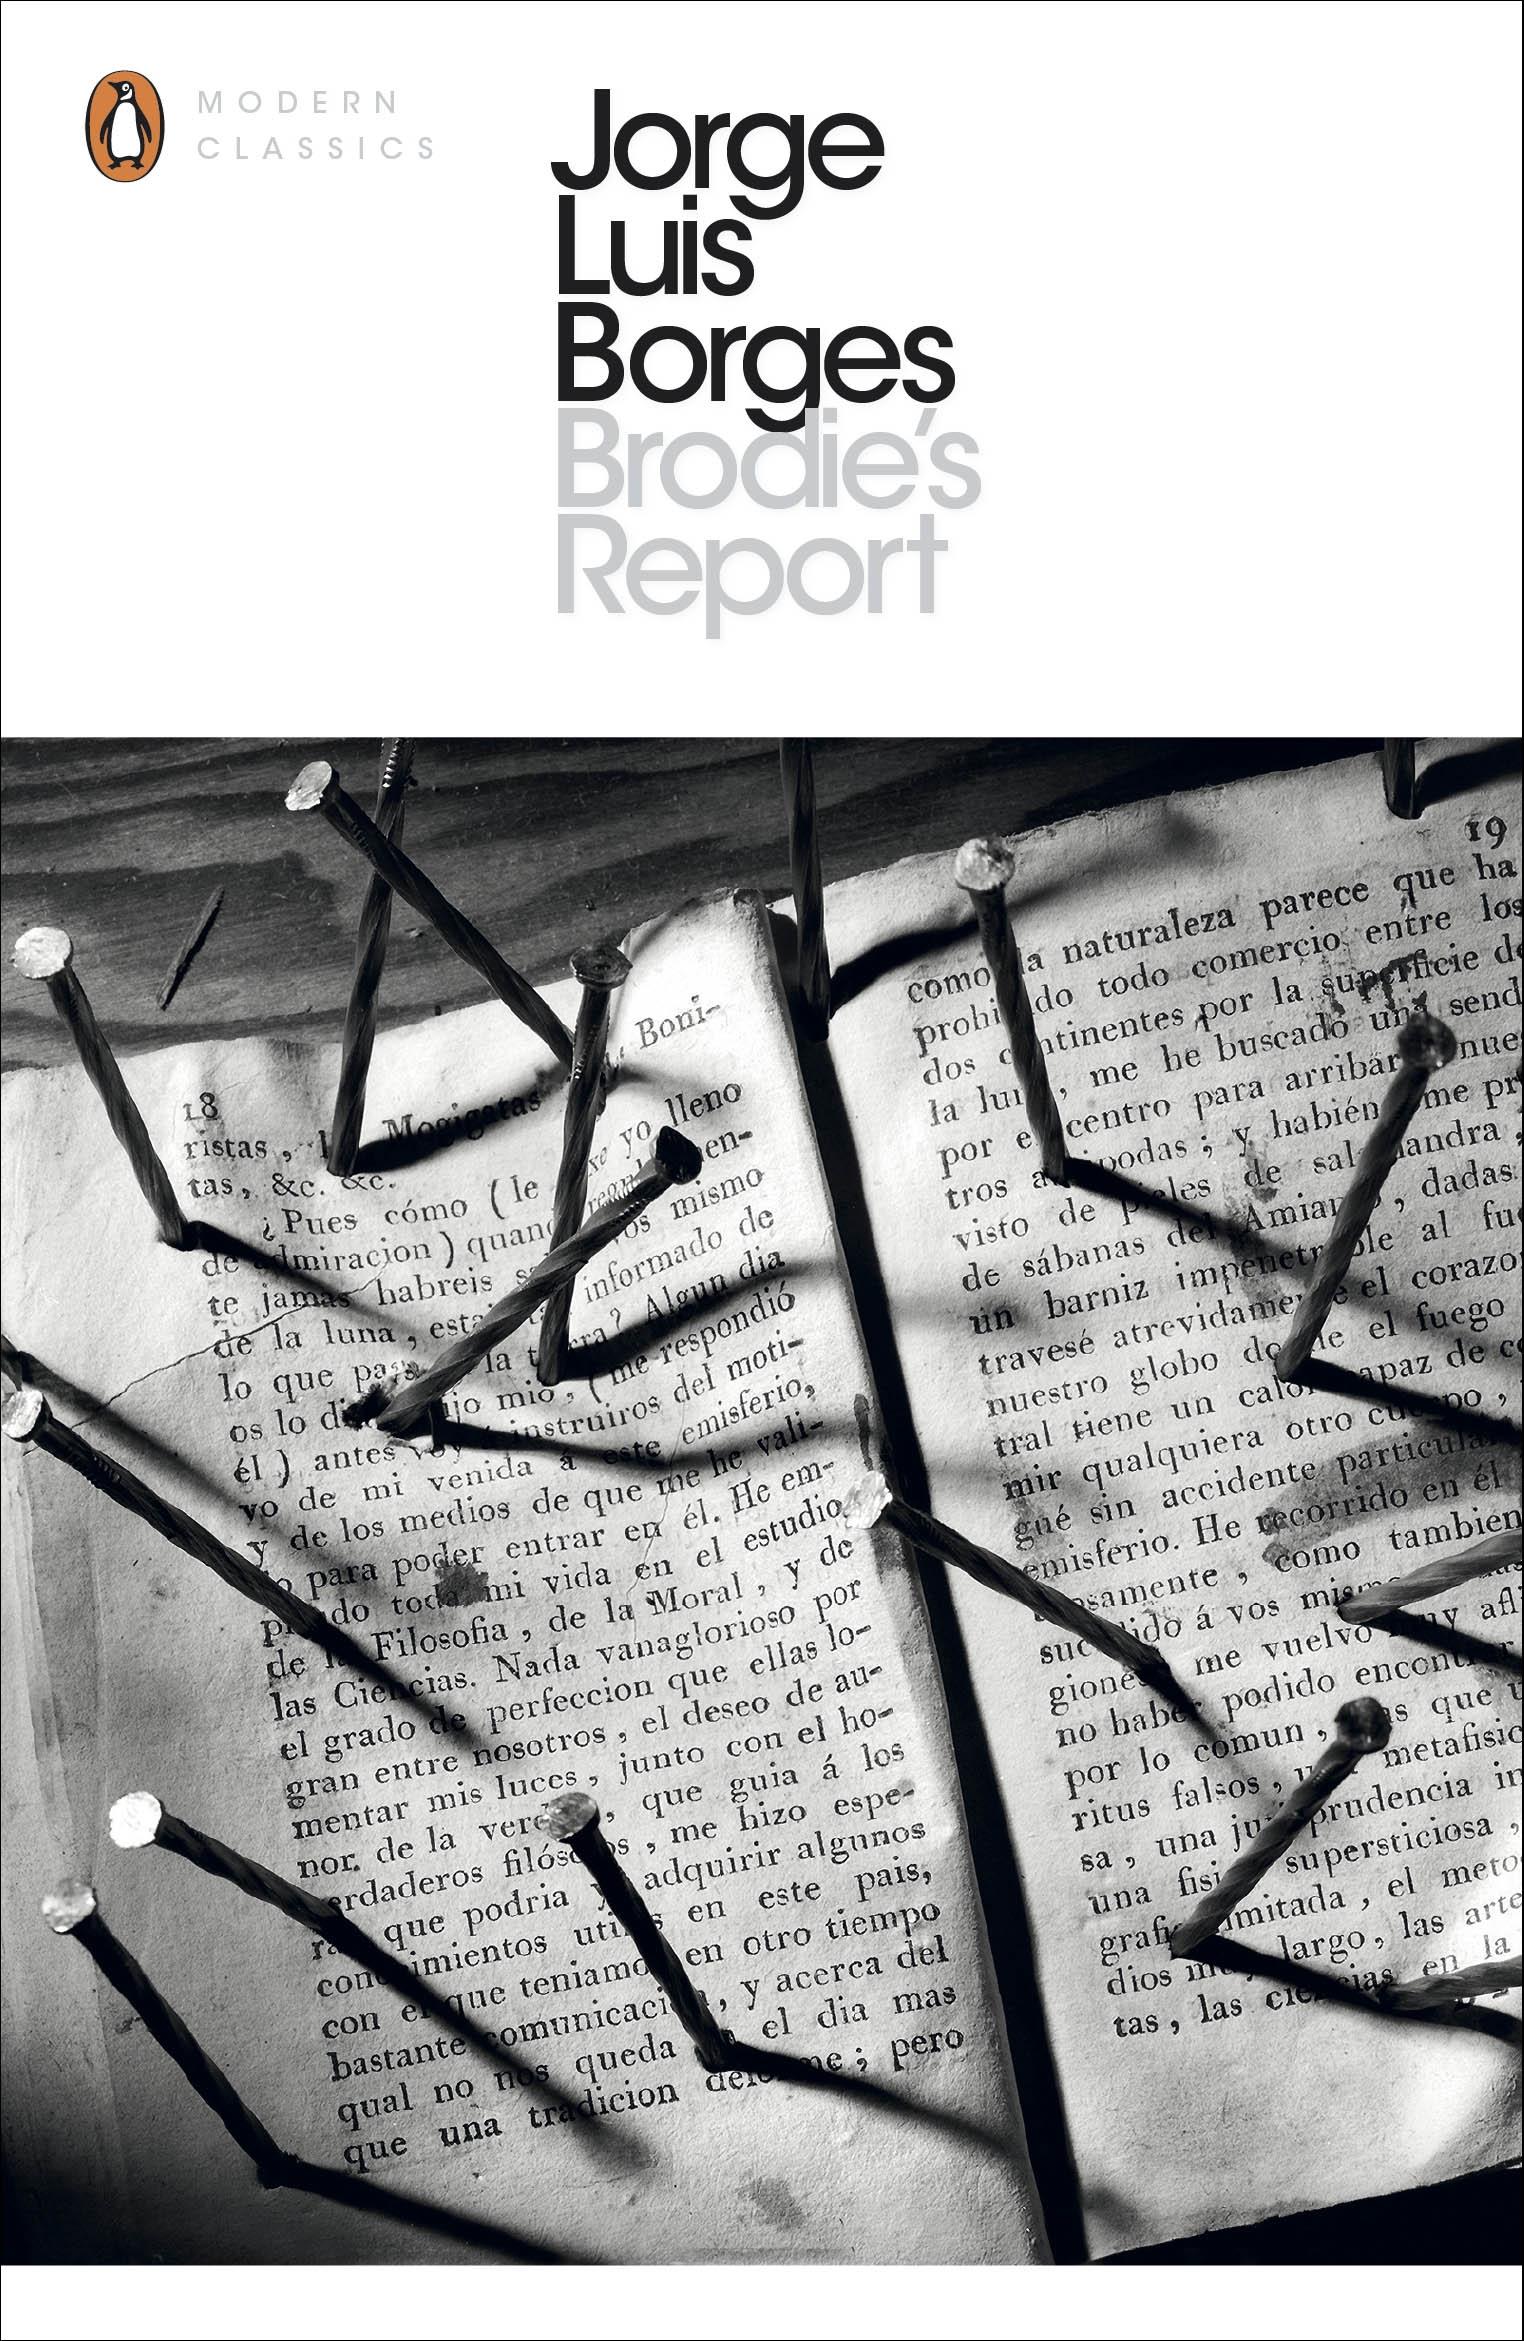 Brodie's Report / Including the Prose Fiction from In Praise of Darkness / Jorge Luis Borges / Taschenbuch / Penguin Modern Classics / Kartoniert / Broschiert / Englisch / 2000 / Penguin Books Ltd - Luis Borges, Jorge